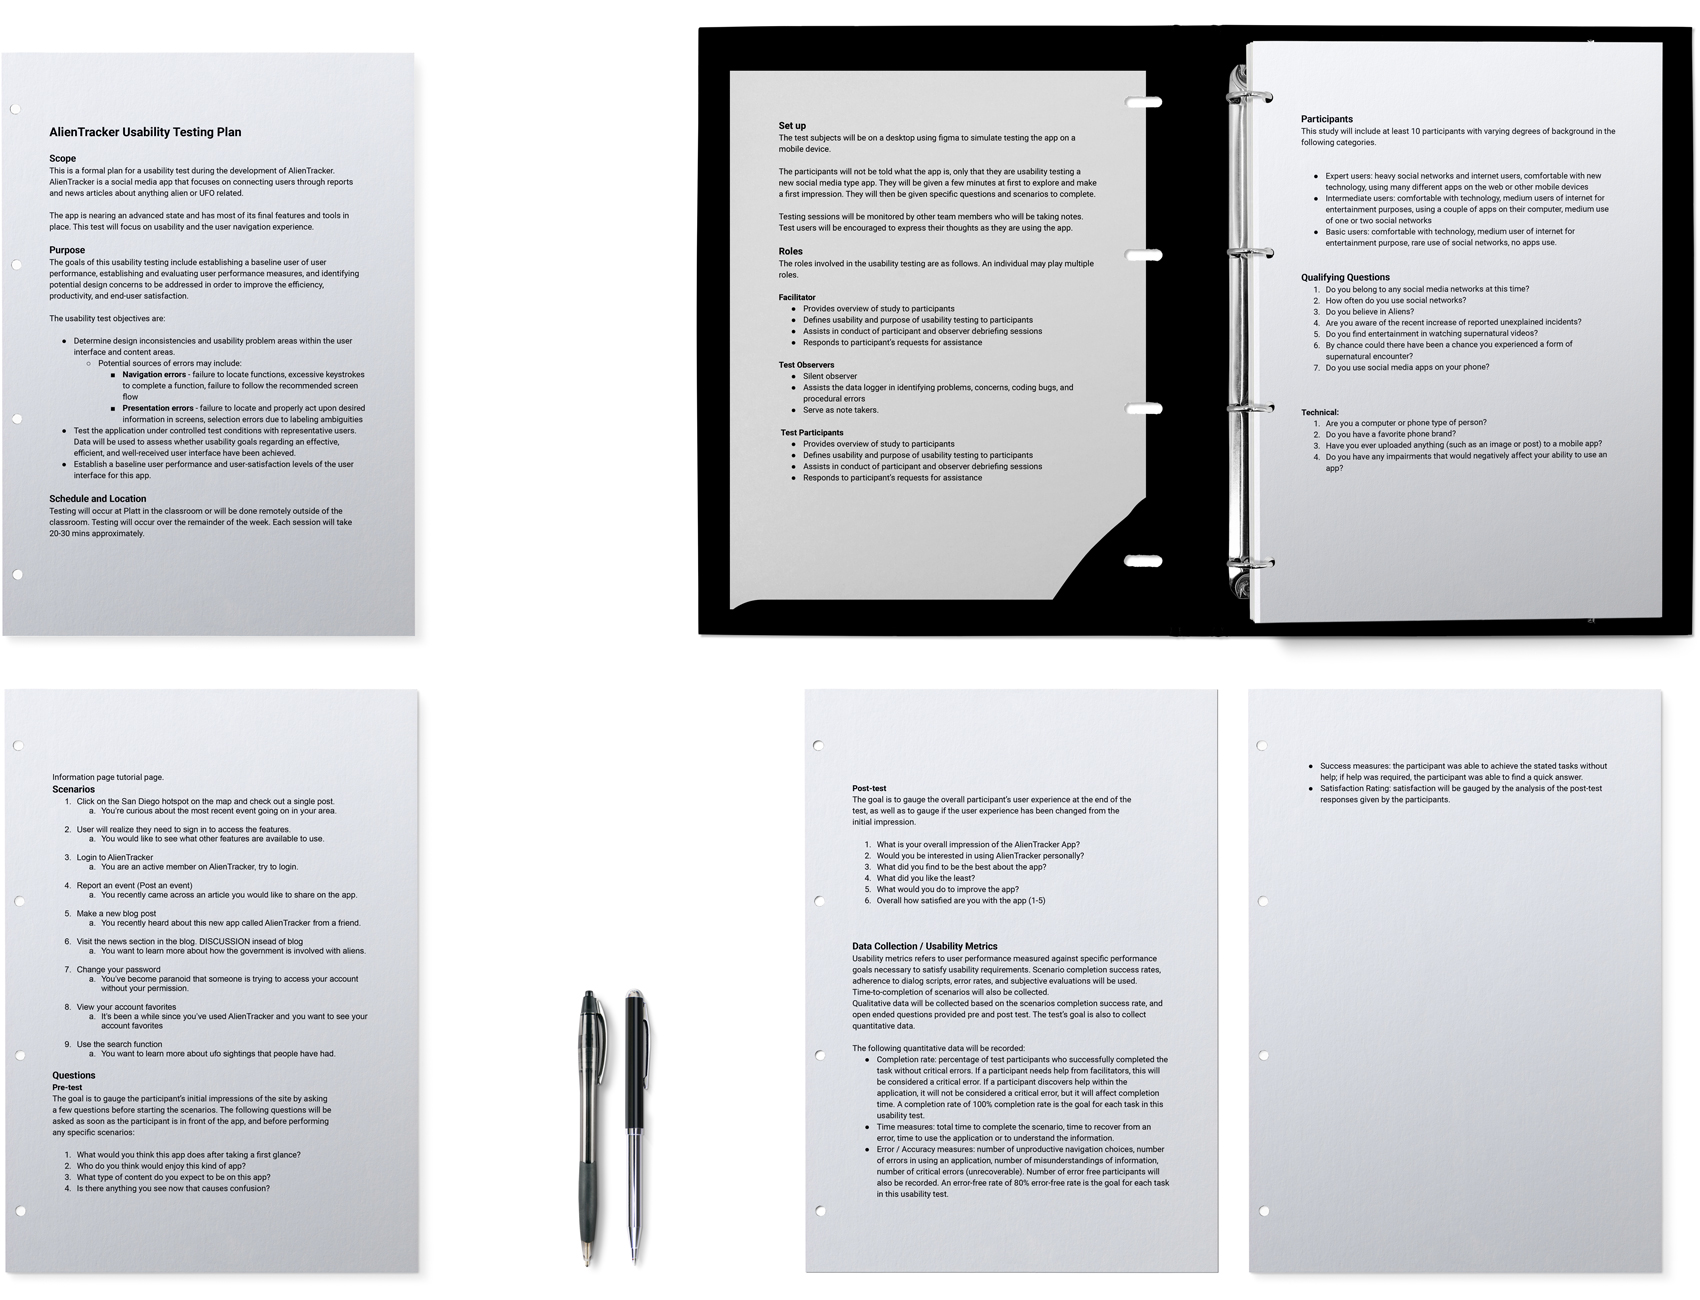 The review document mockup..